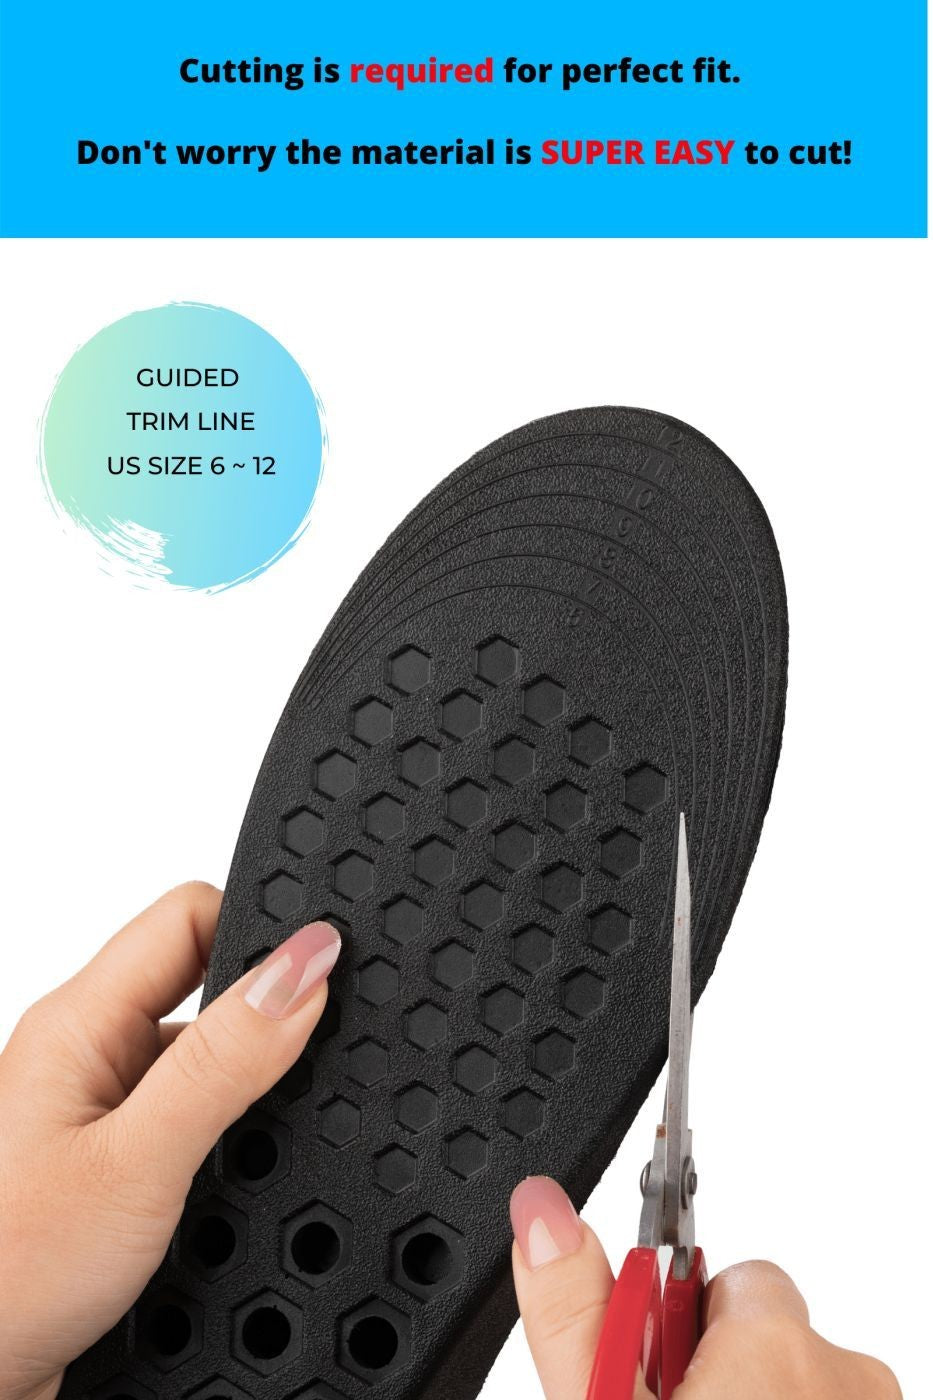 Elevator shoes height increase IK207 - Breathable Comfort Height Enhancing Shoe Insoles For Men - 3.2 CM | 1.25 INCH Taller